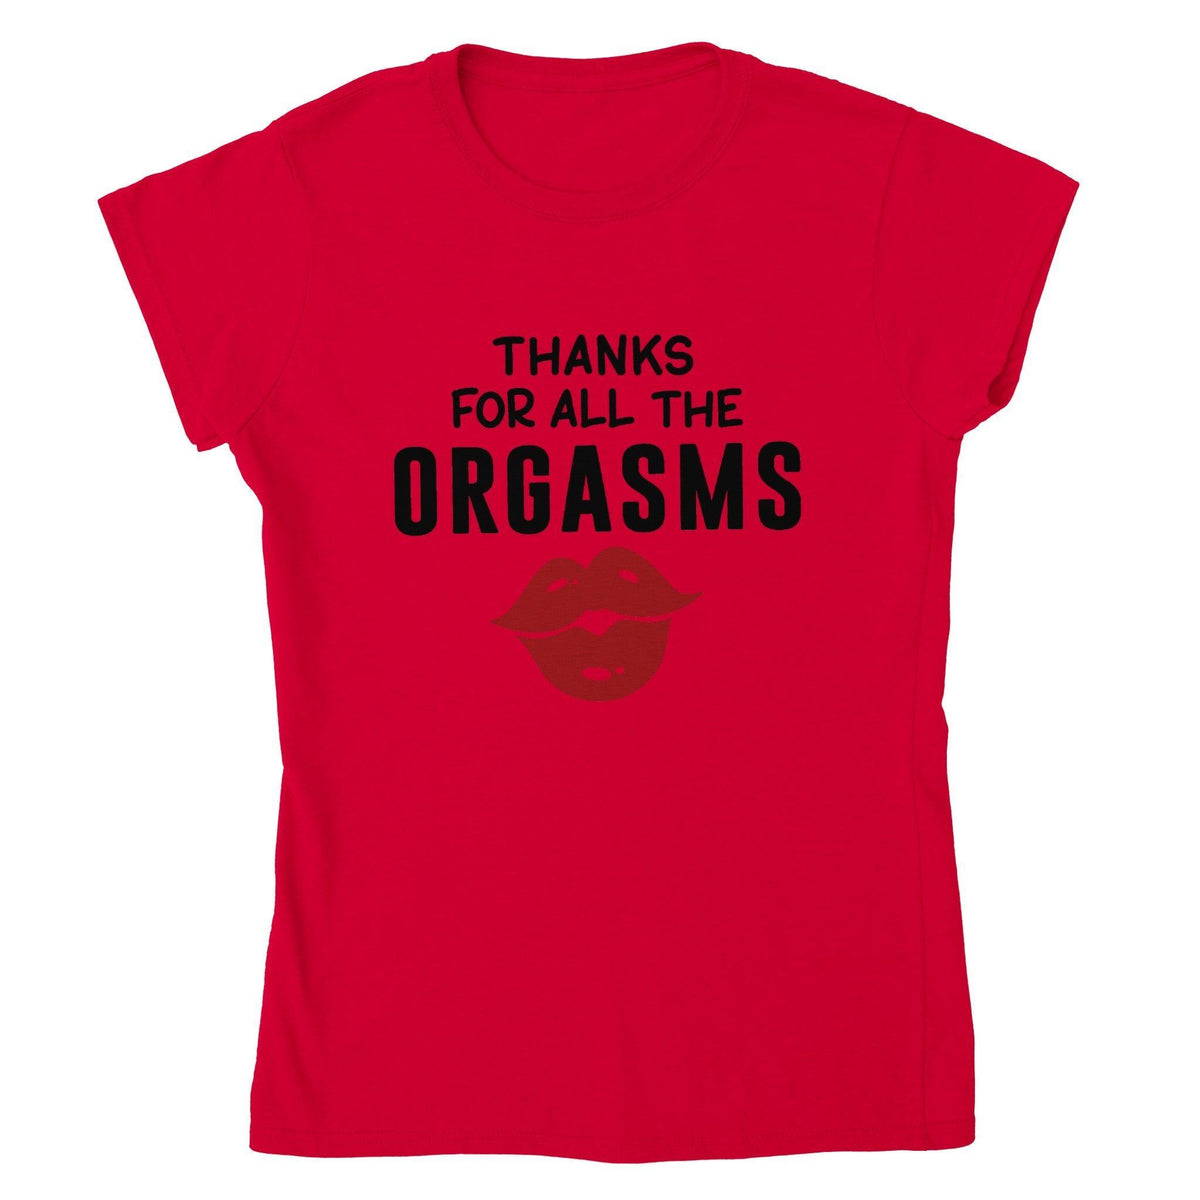 THANKS FOR ORGASMS T-shirt-Regular Fit Tee-StylinArts